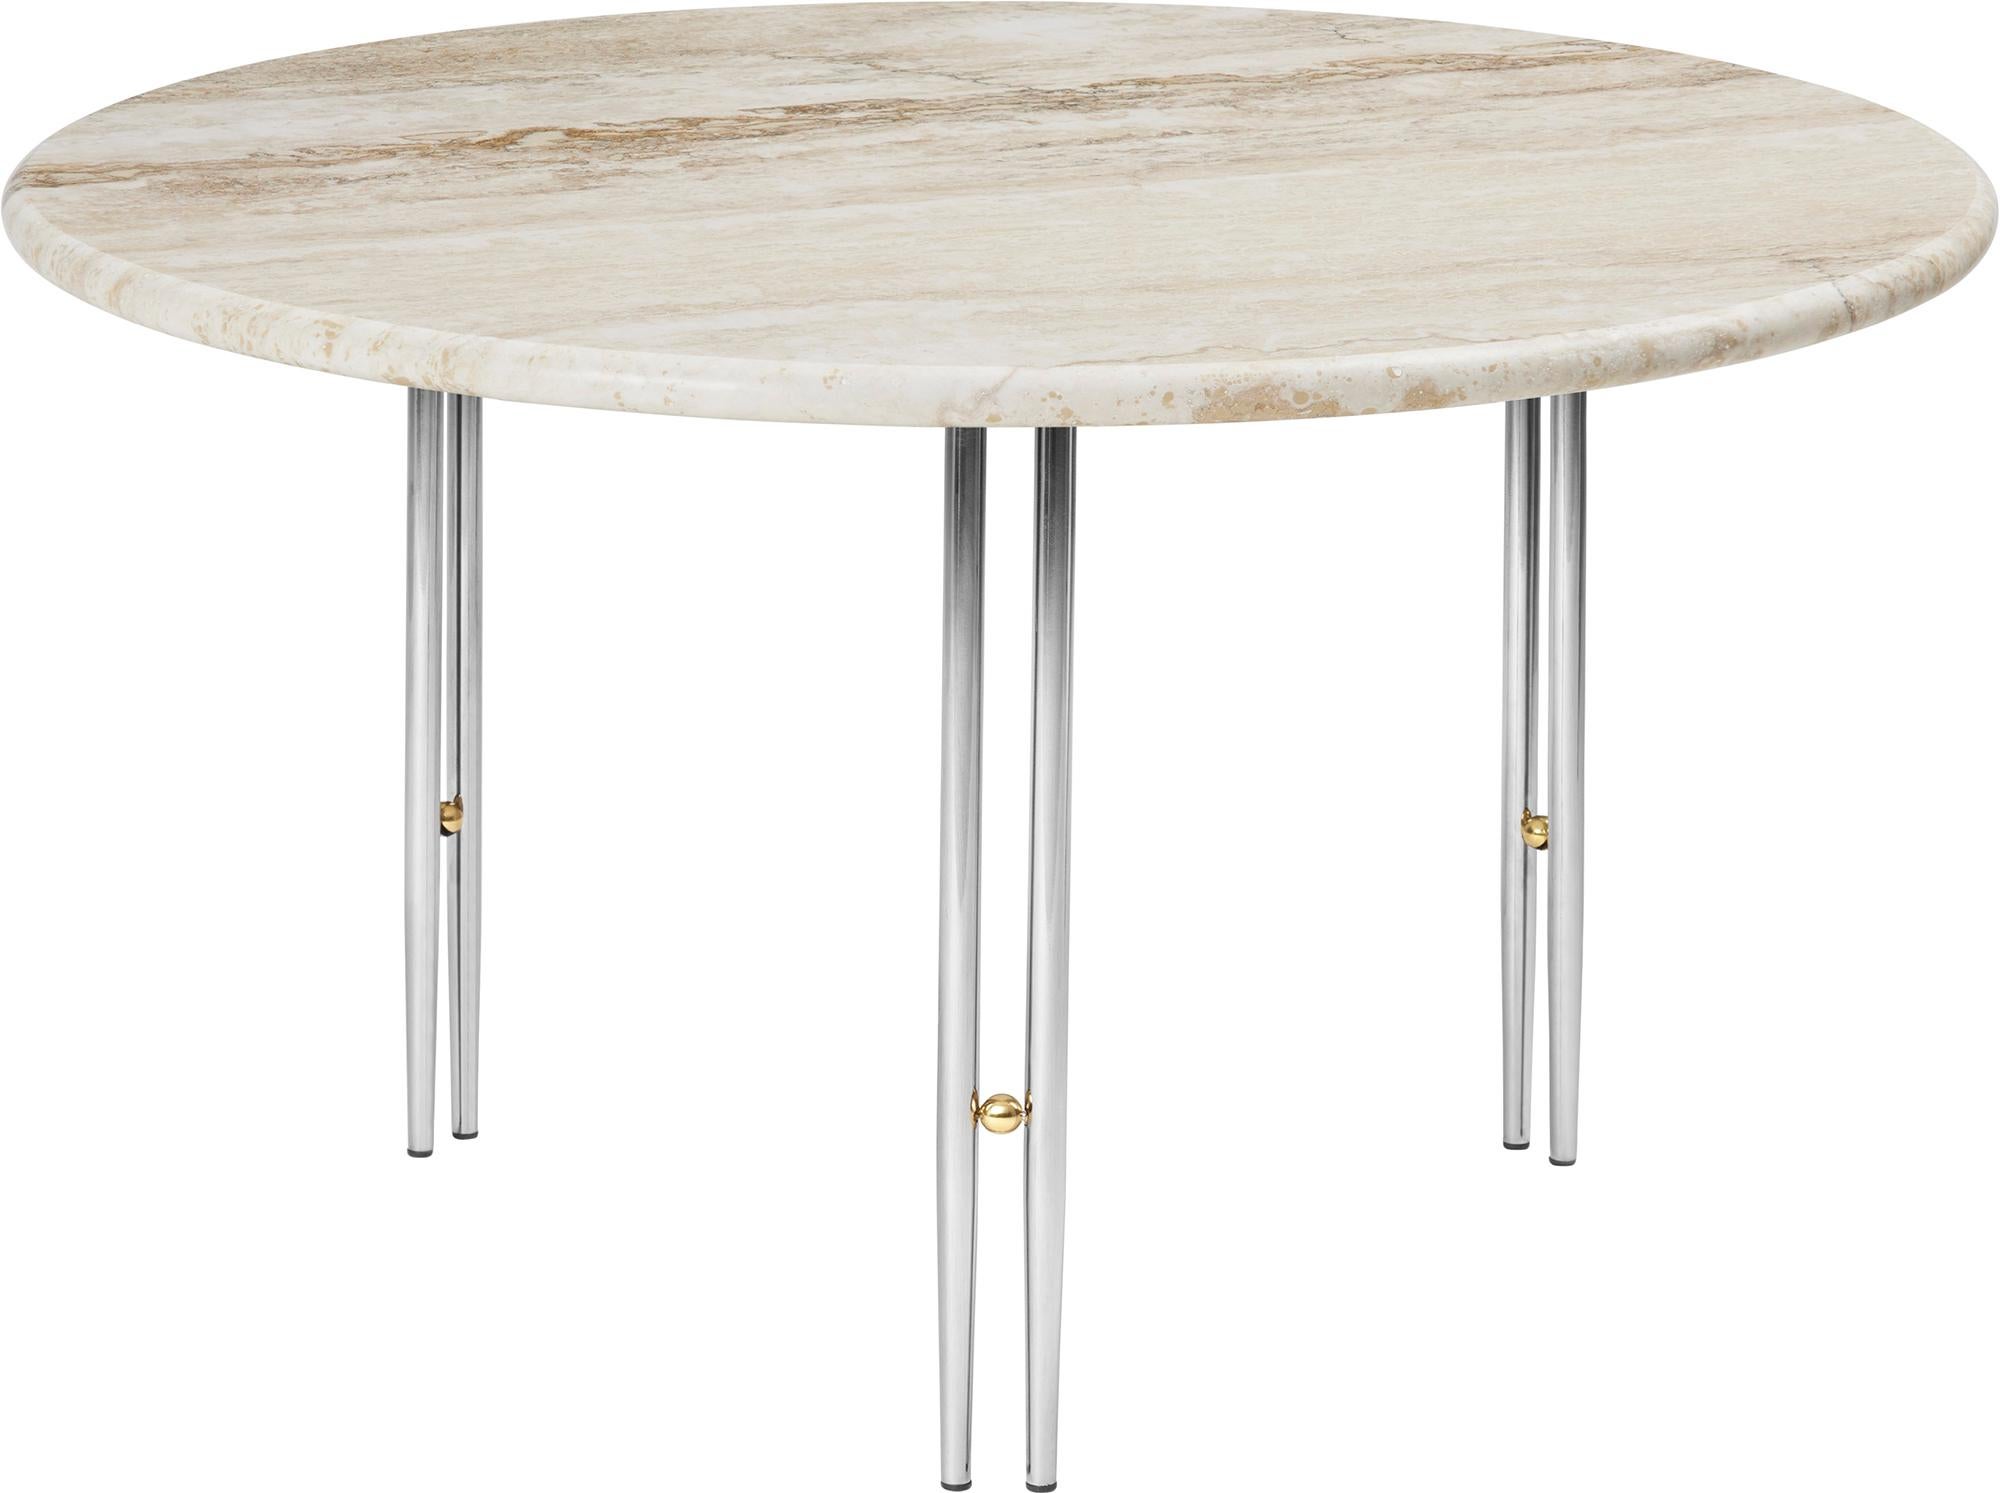 Large ‘IOI’ Travertine Coffee Table by GamFratesi for GUBI For Sale 7